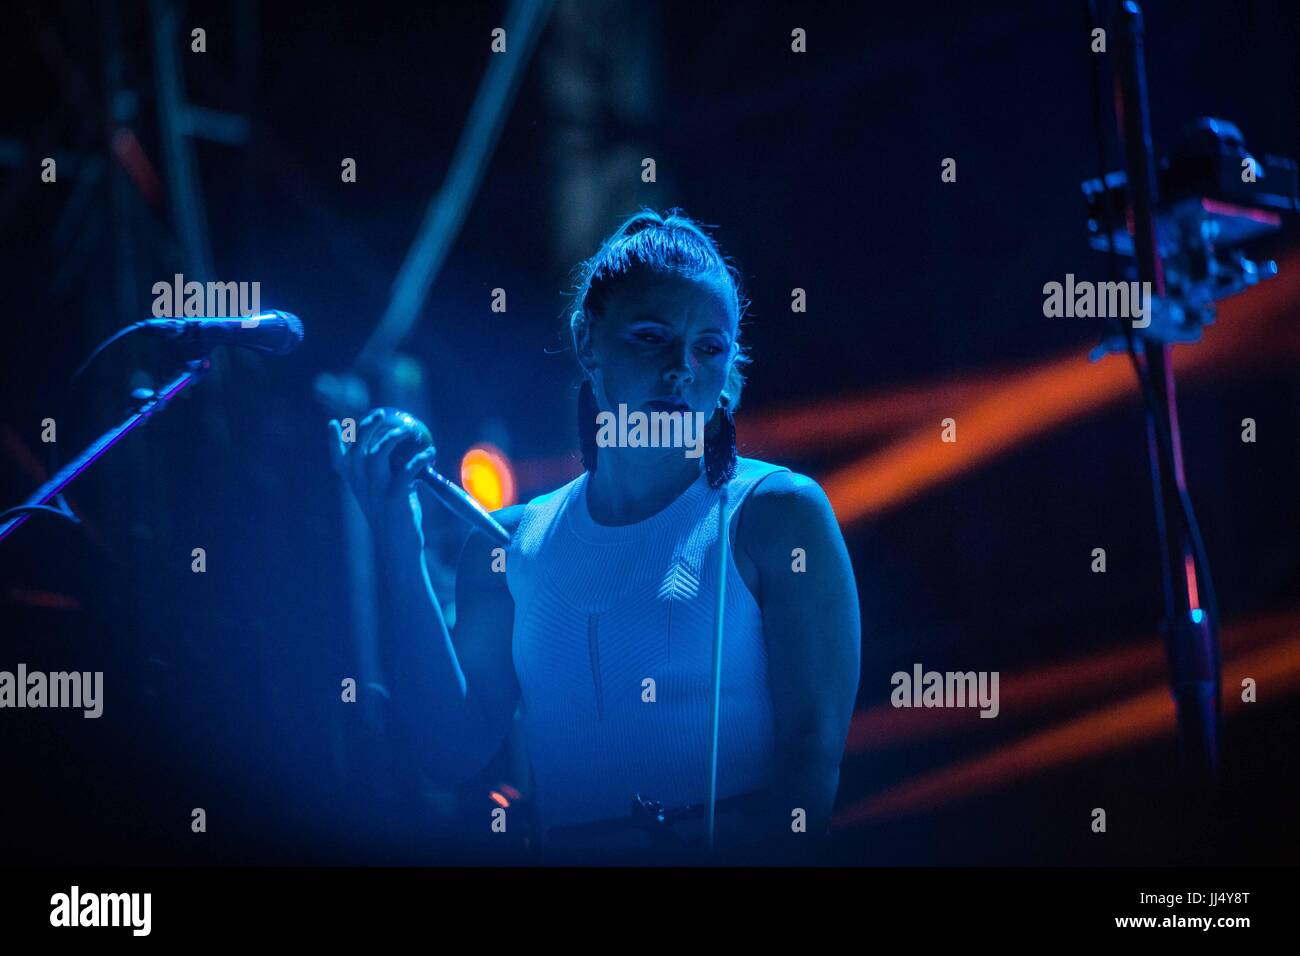 Milan, Italy. 17th July, 2017. Sarah Neufeld of the canadian indie rock band Arcade Fire pictured on stage as they perform at Milano Summer Festival, Ippodromo San Siro Milan. Credit: Roberto Finizio/Pacific Press/Alamy Live News Stock Photo